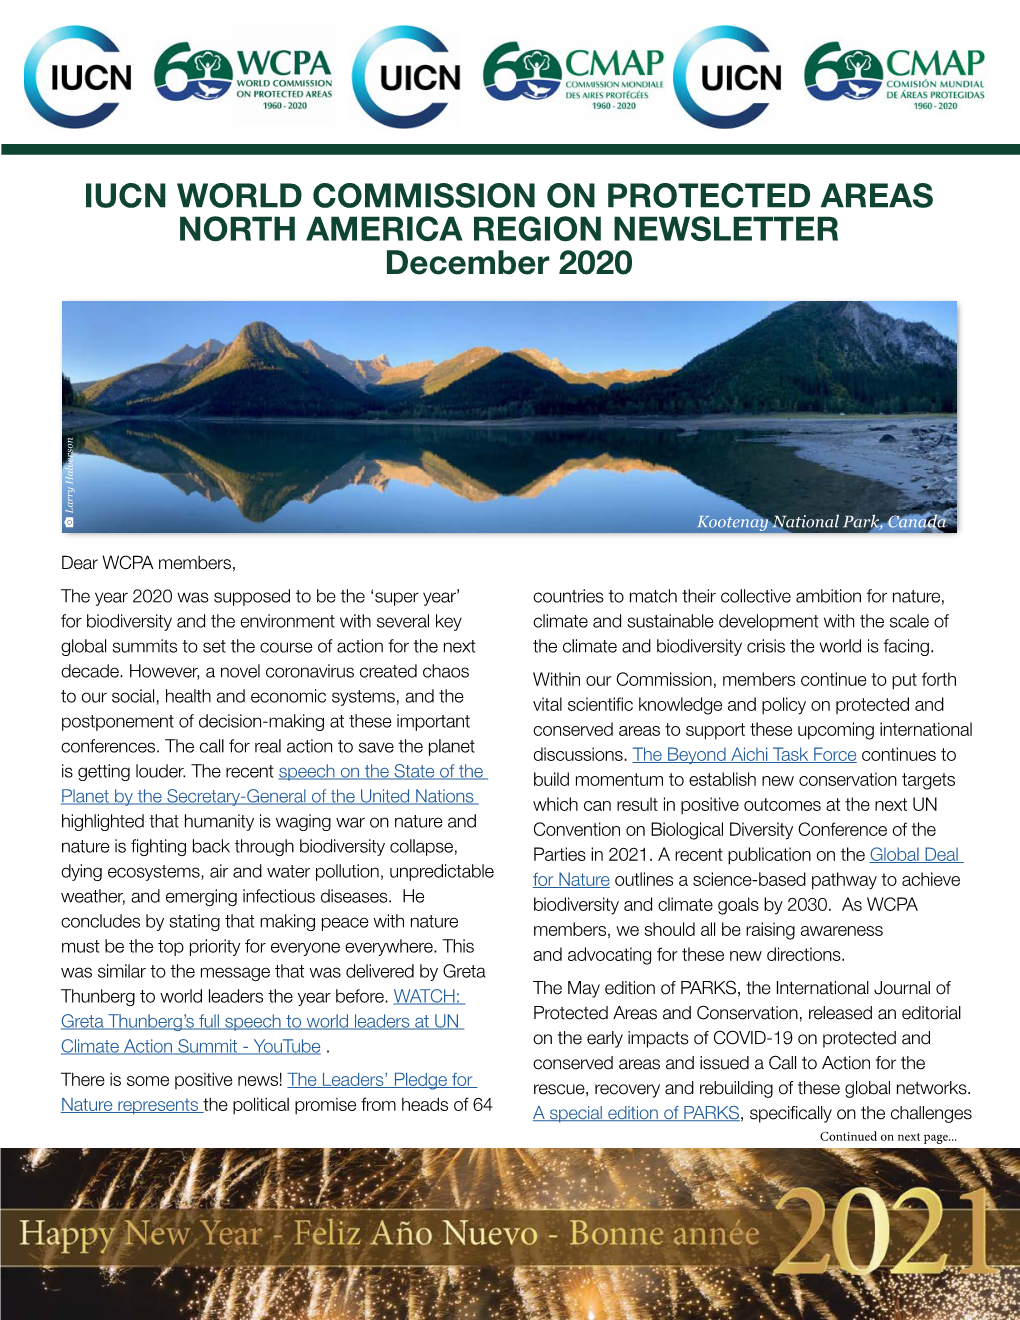 IUCN WORLD COMMISSION on PROTECTED AREAS NORTH AMERICA REGION NEWSLETTER December 2020